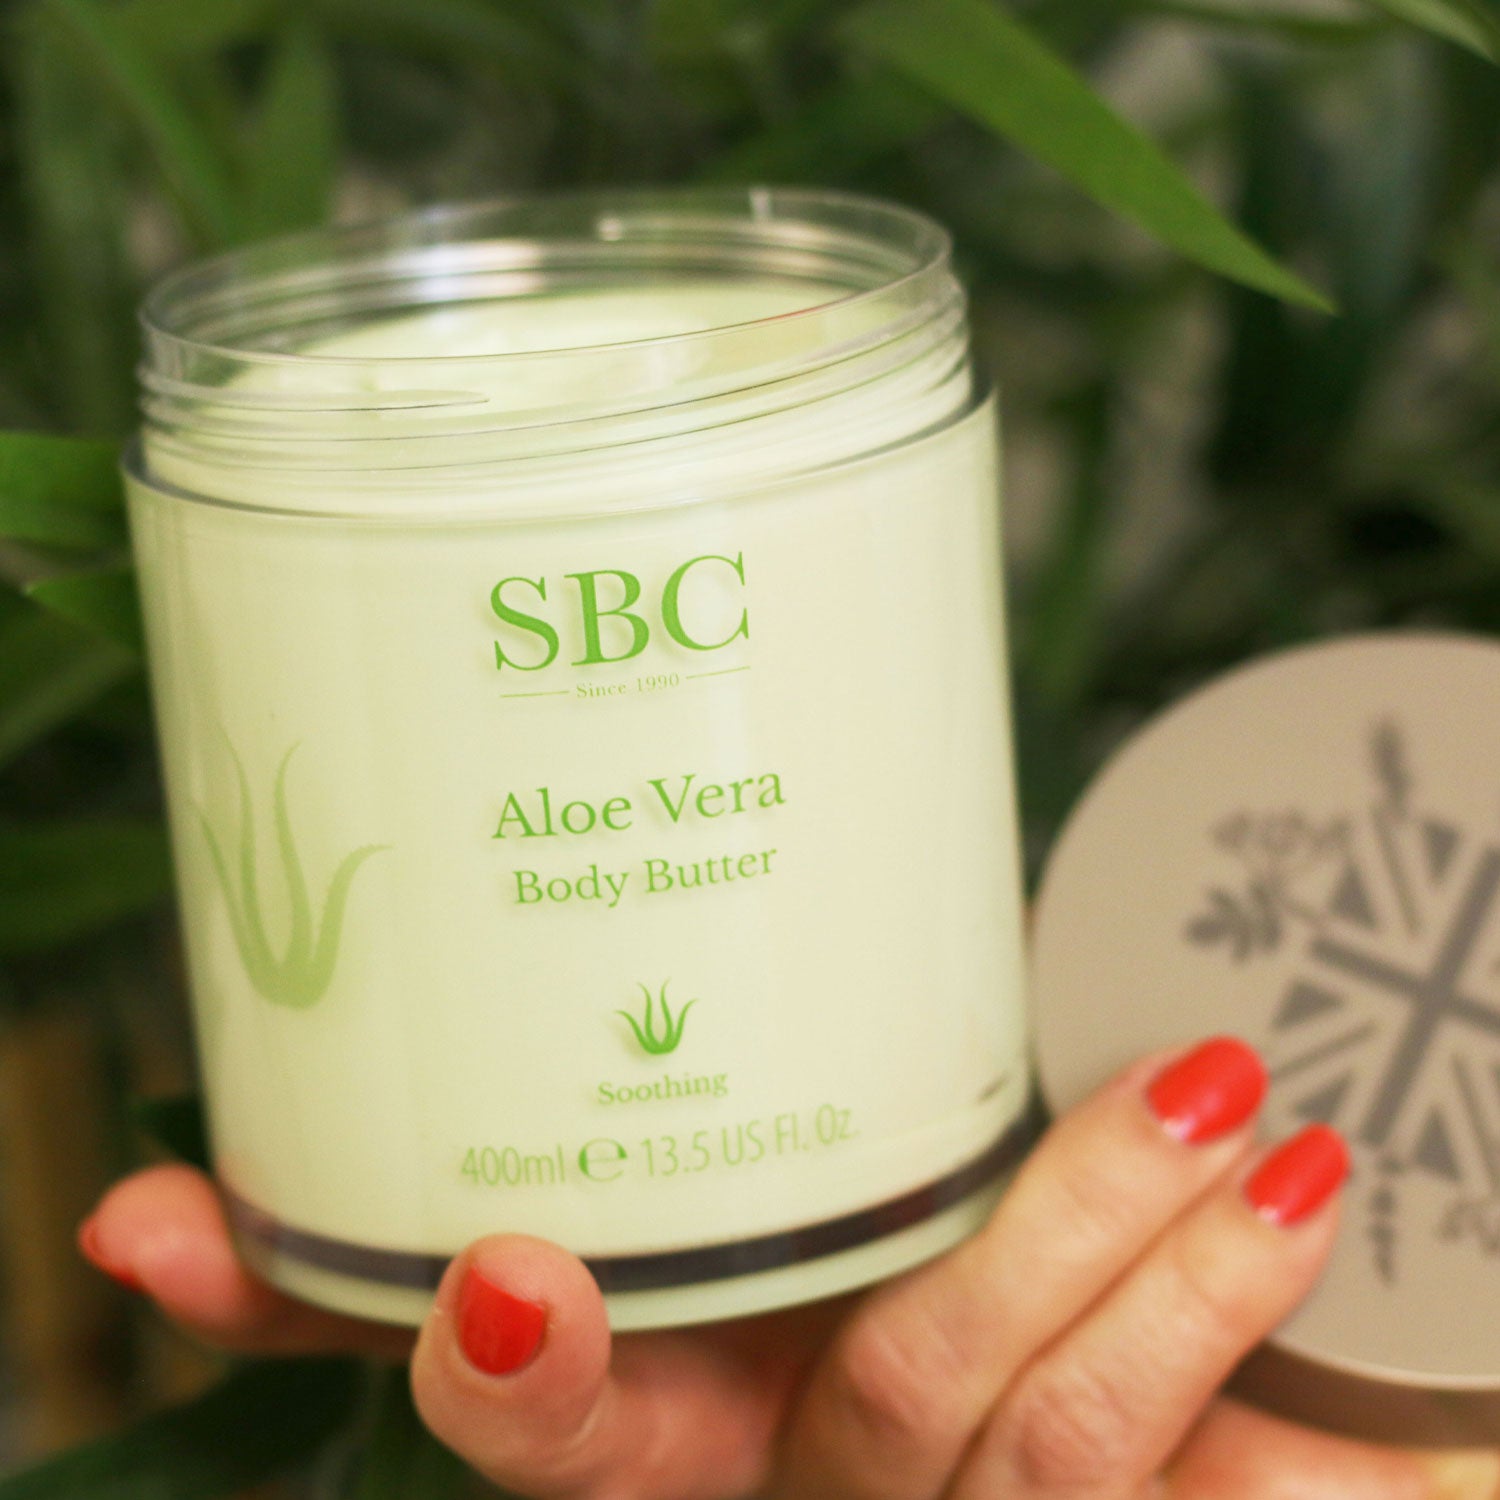 Aloe Vera Body Butter with its lid of bring held in a hand 